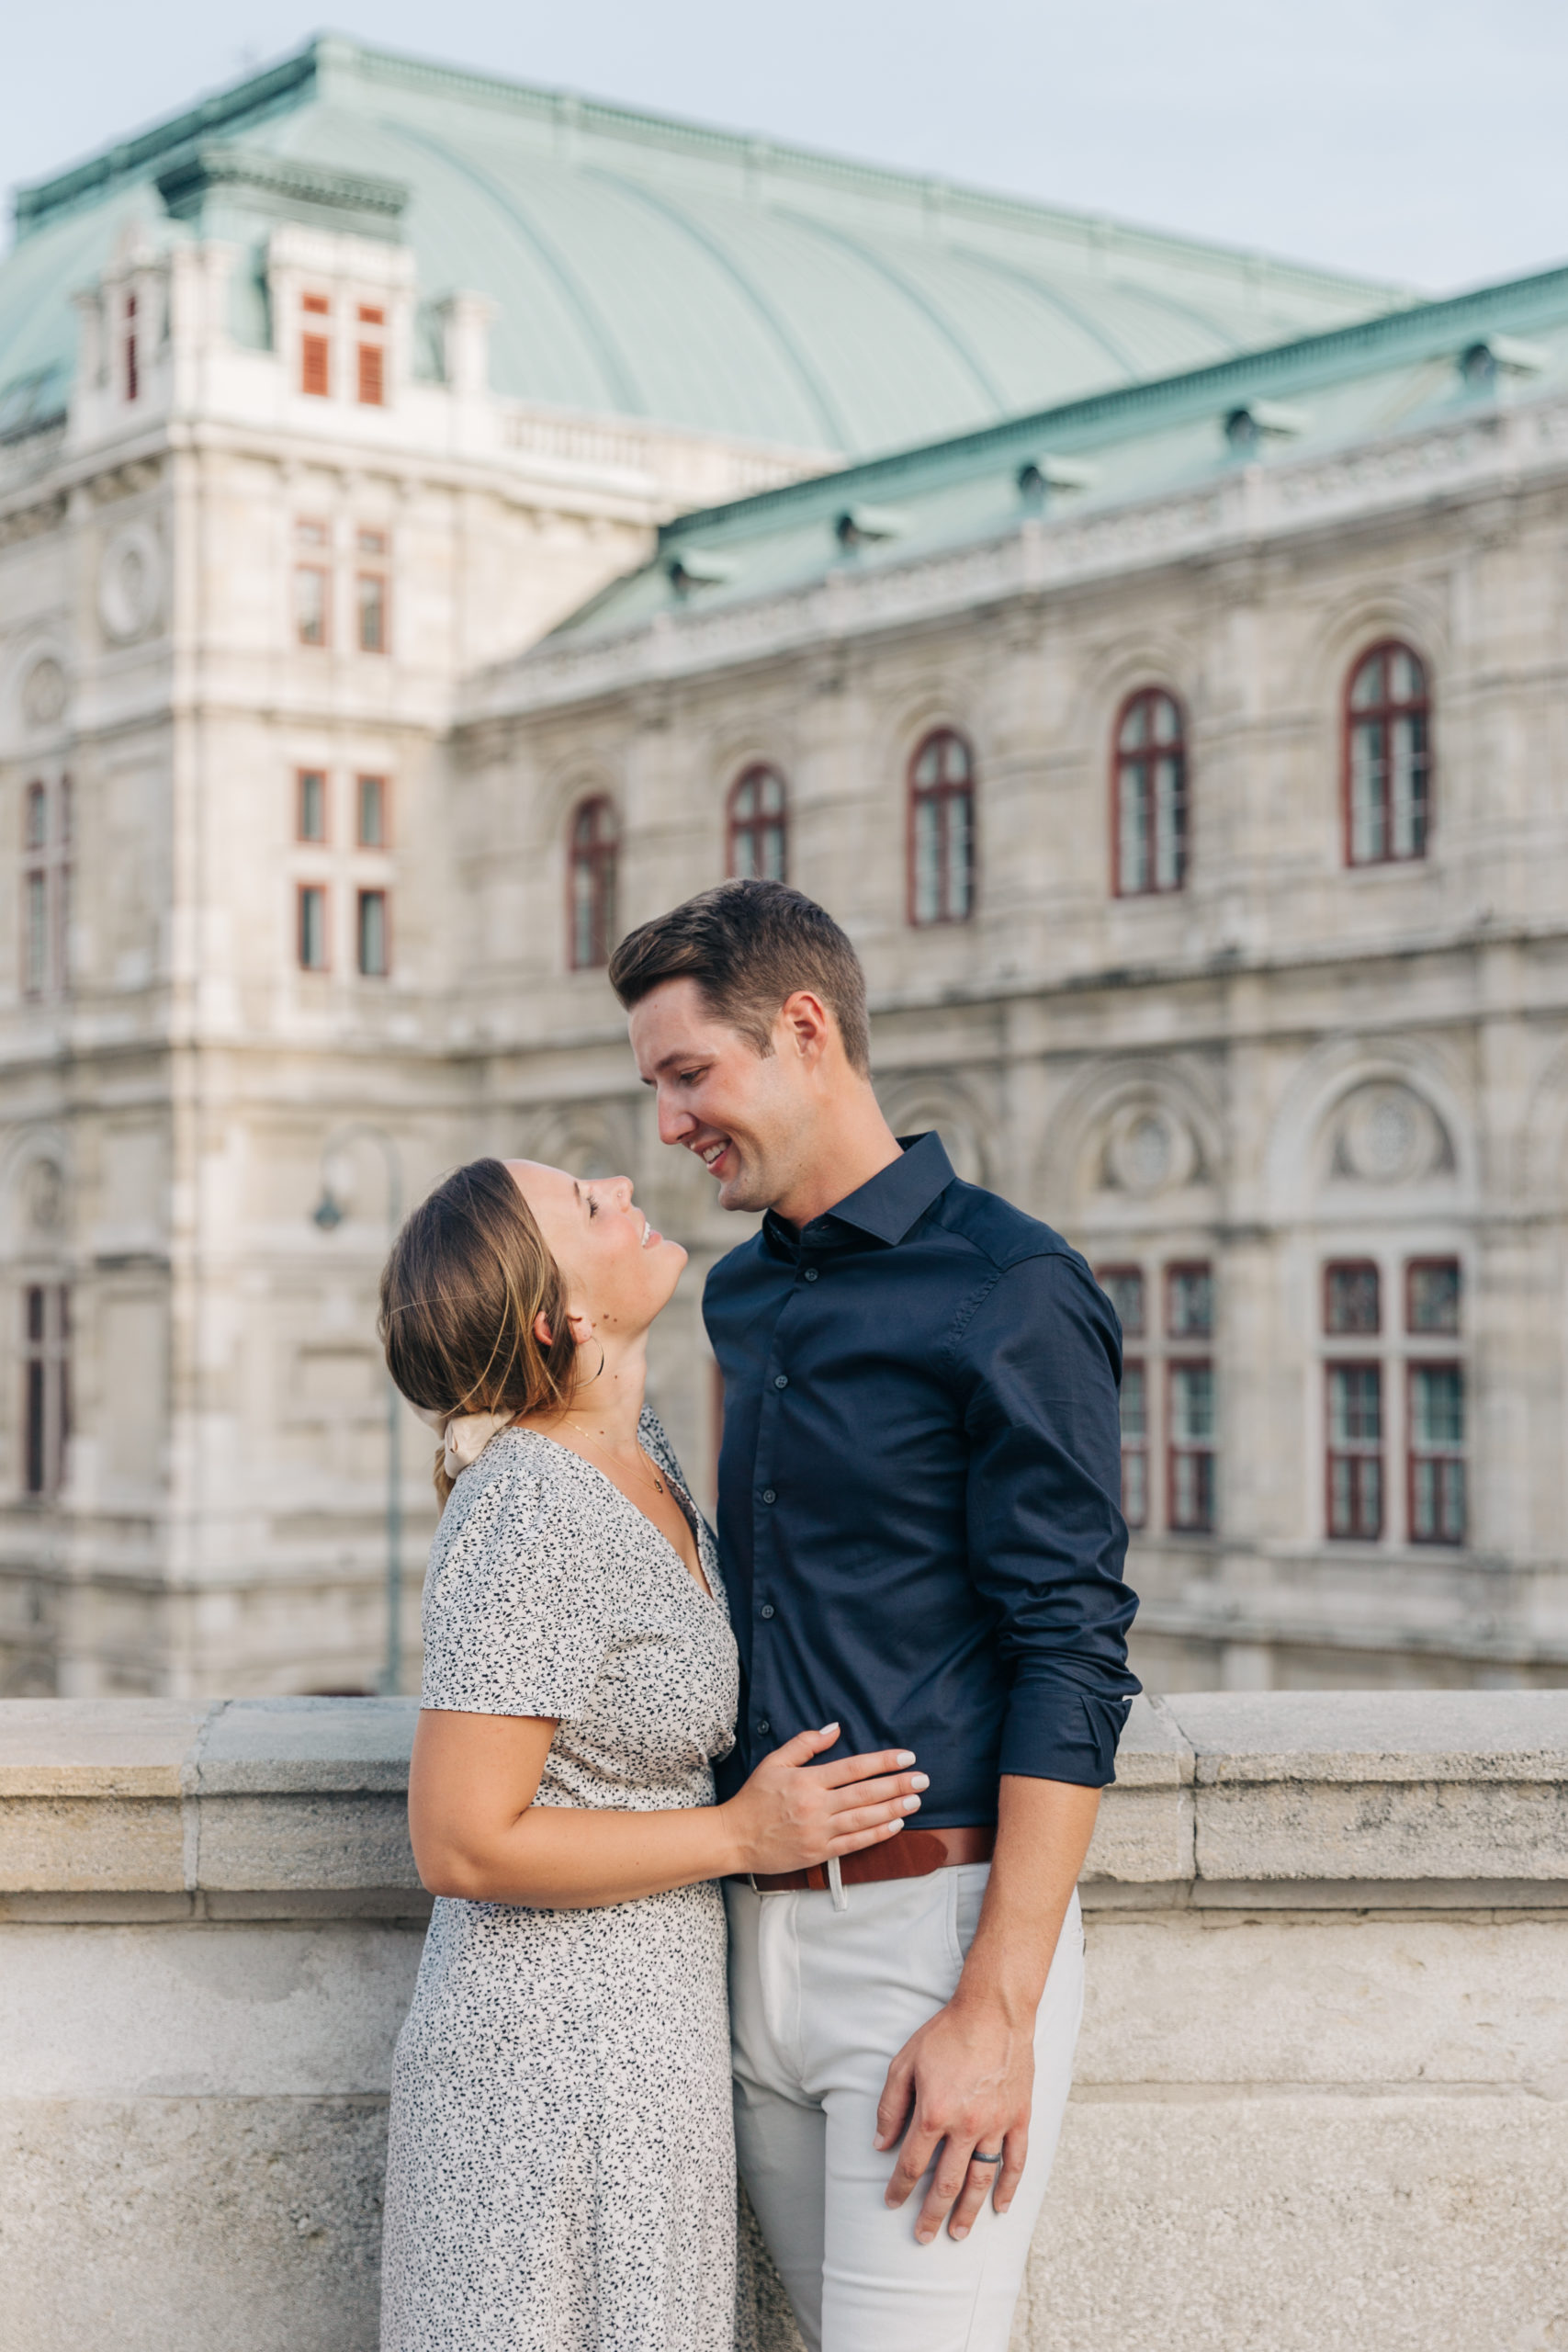 Why You Should Book a Vienna Photo Session With Me